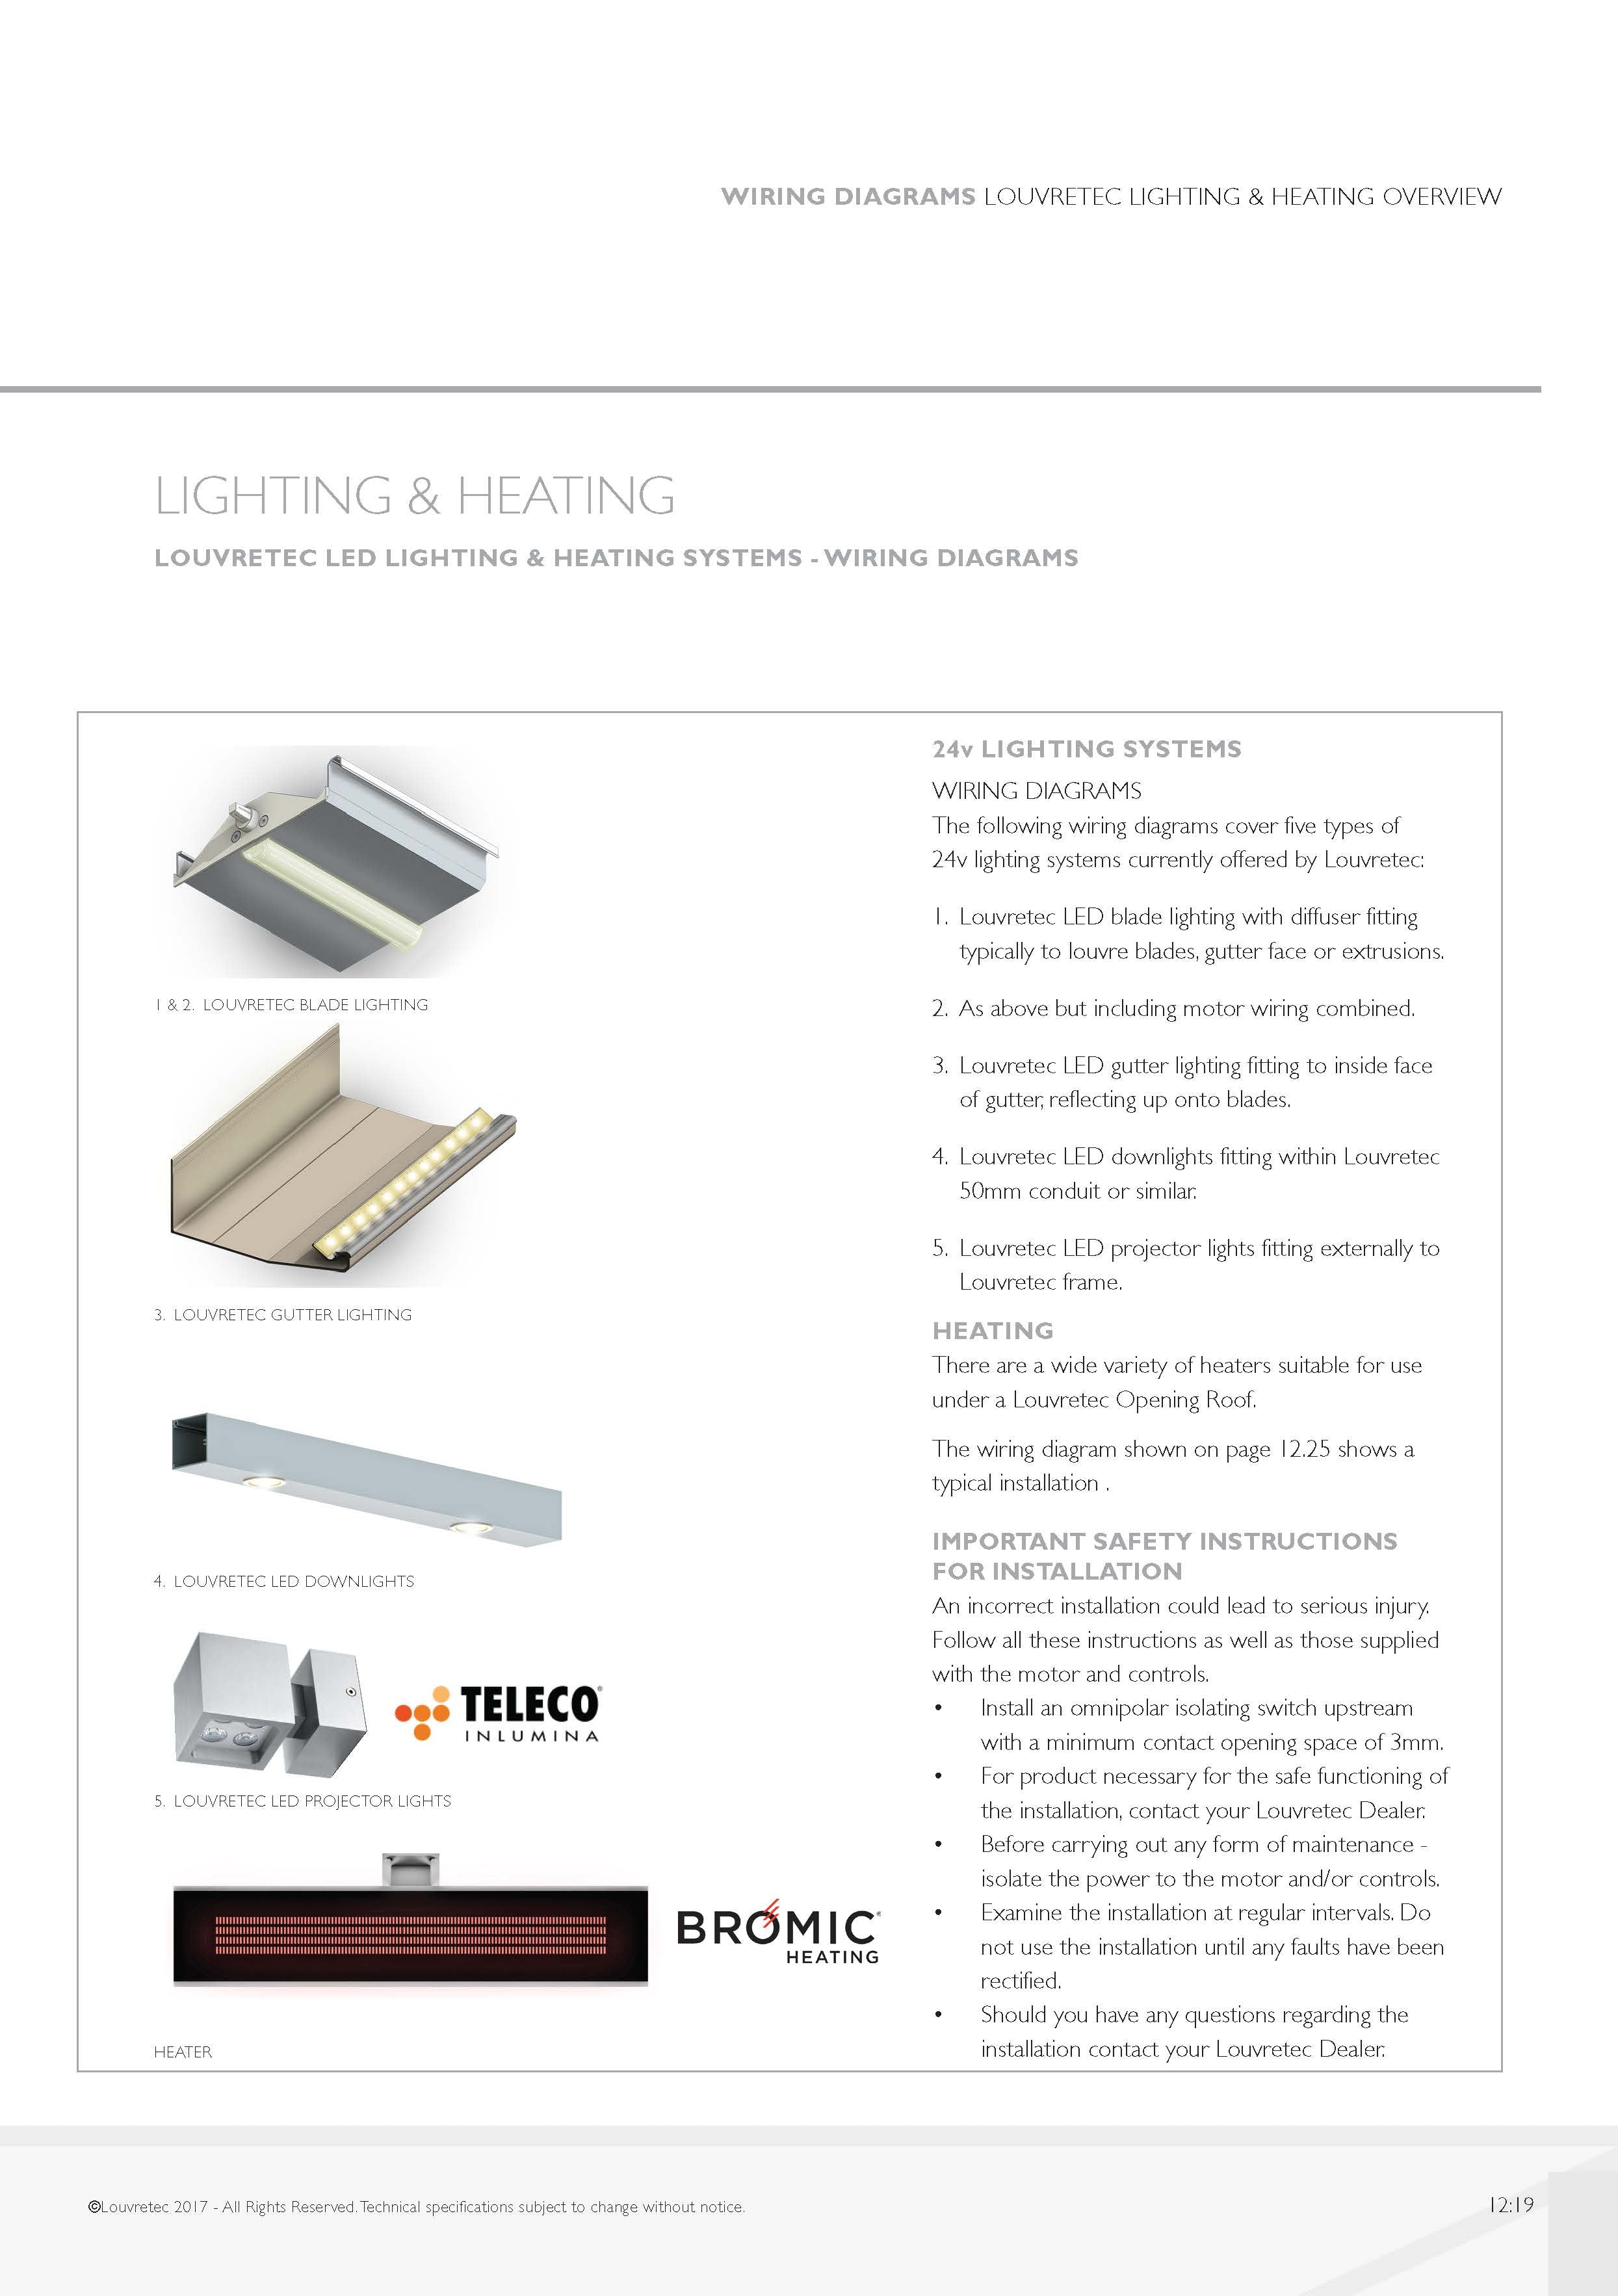 24V Lighting Systems Overview | 12.19